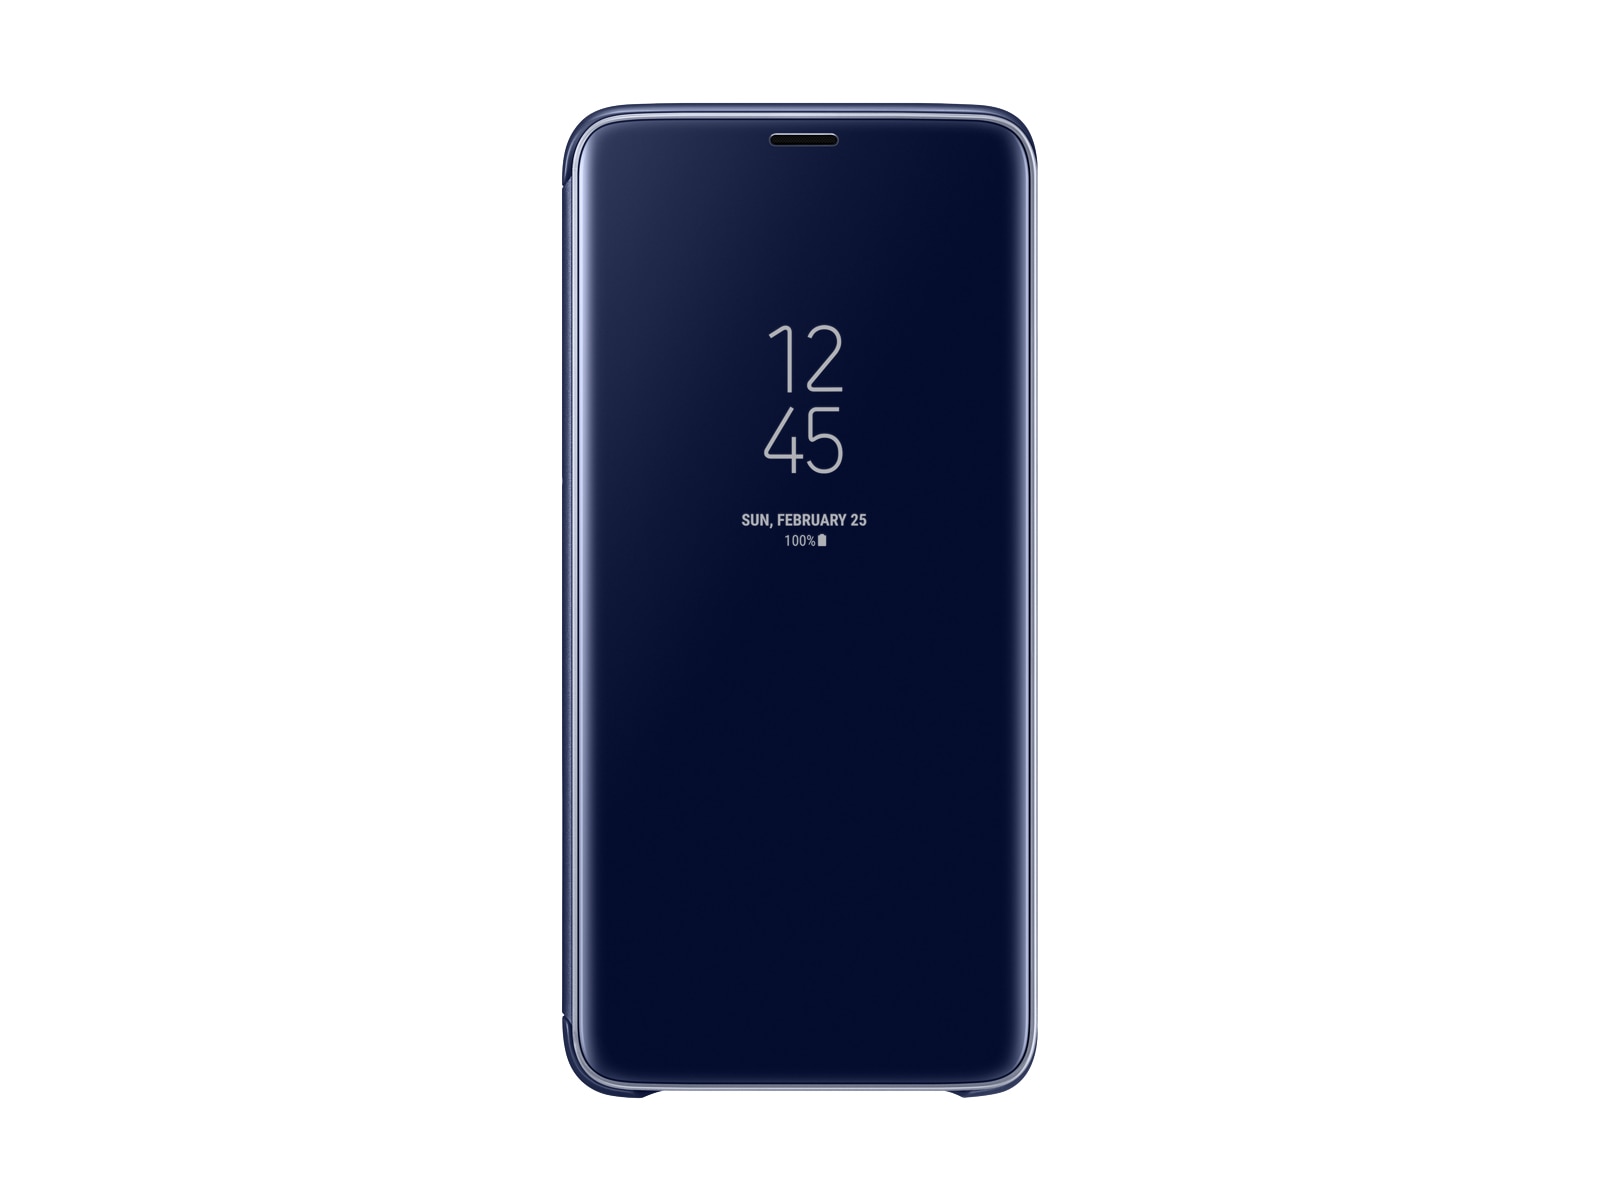 Panorama Kijkgat Vervoer Galaxy S9+ S-View Cover, Blue Mobile Accessories - EF-ZG965CLEGUS | Samsung  US